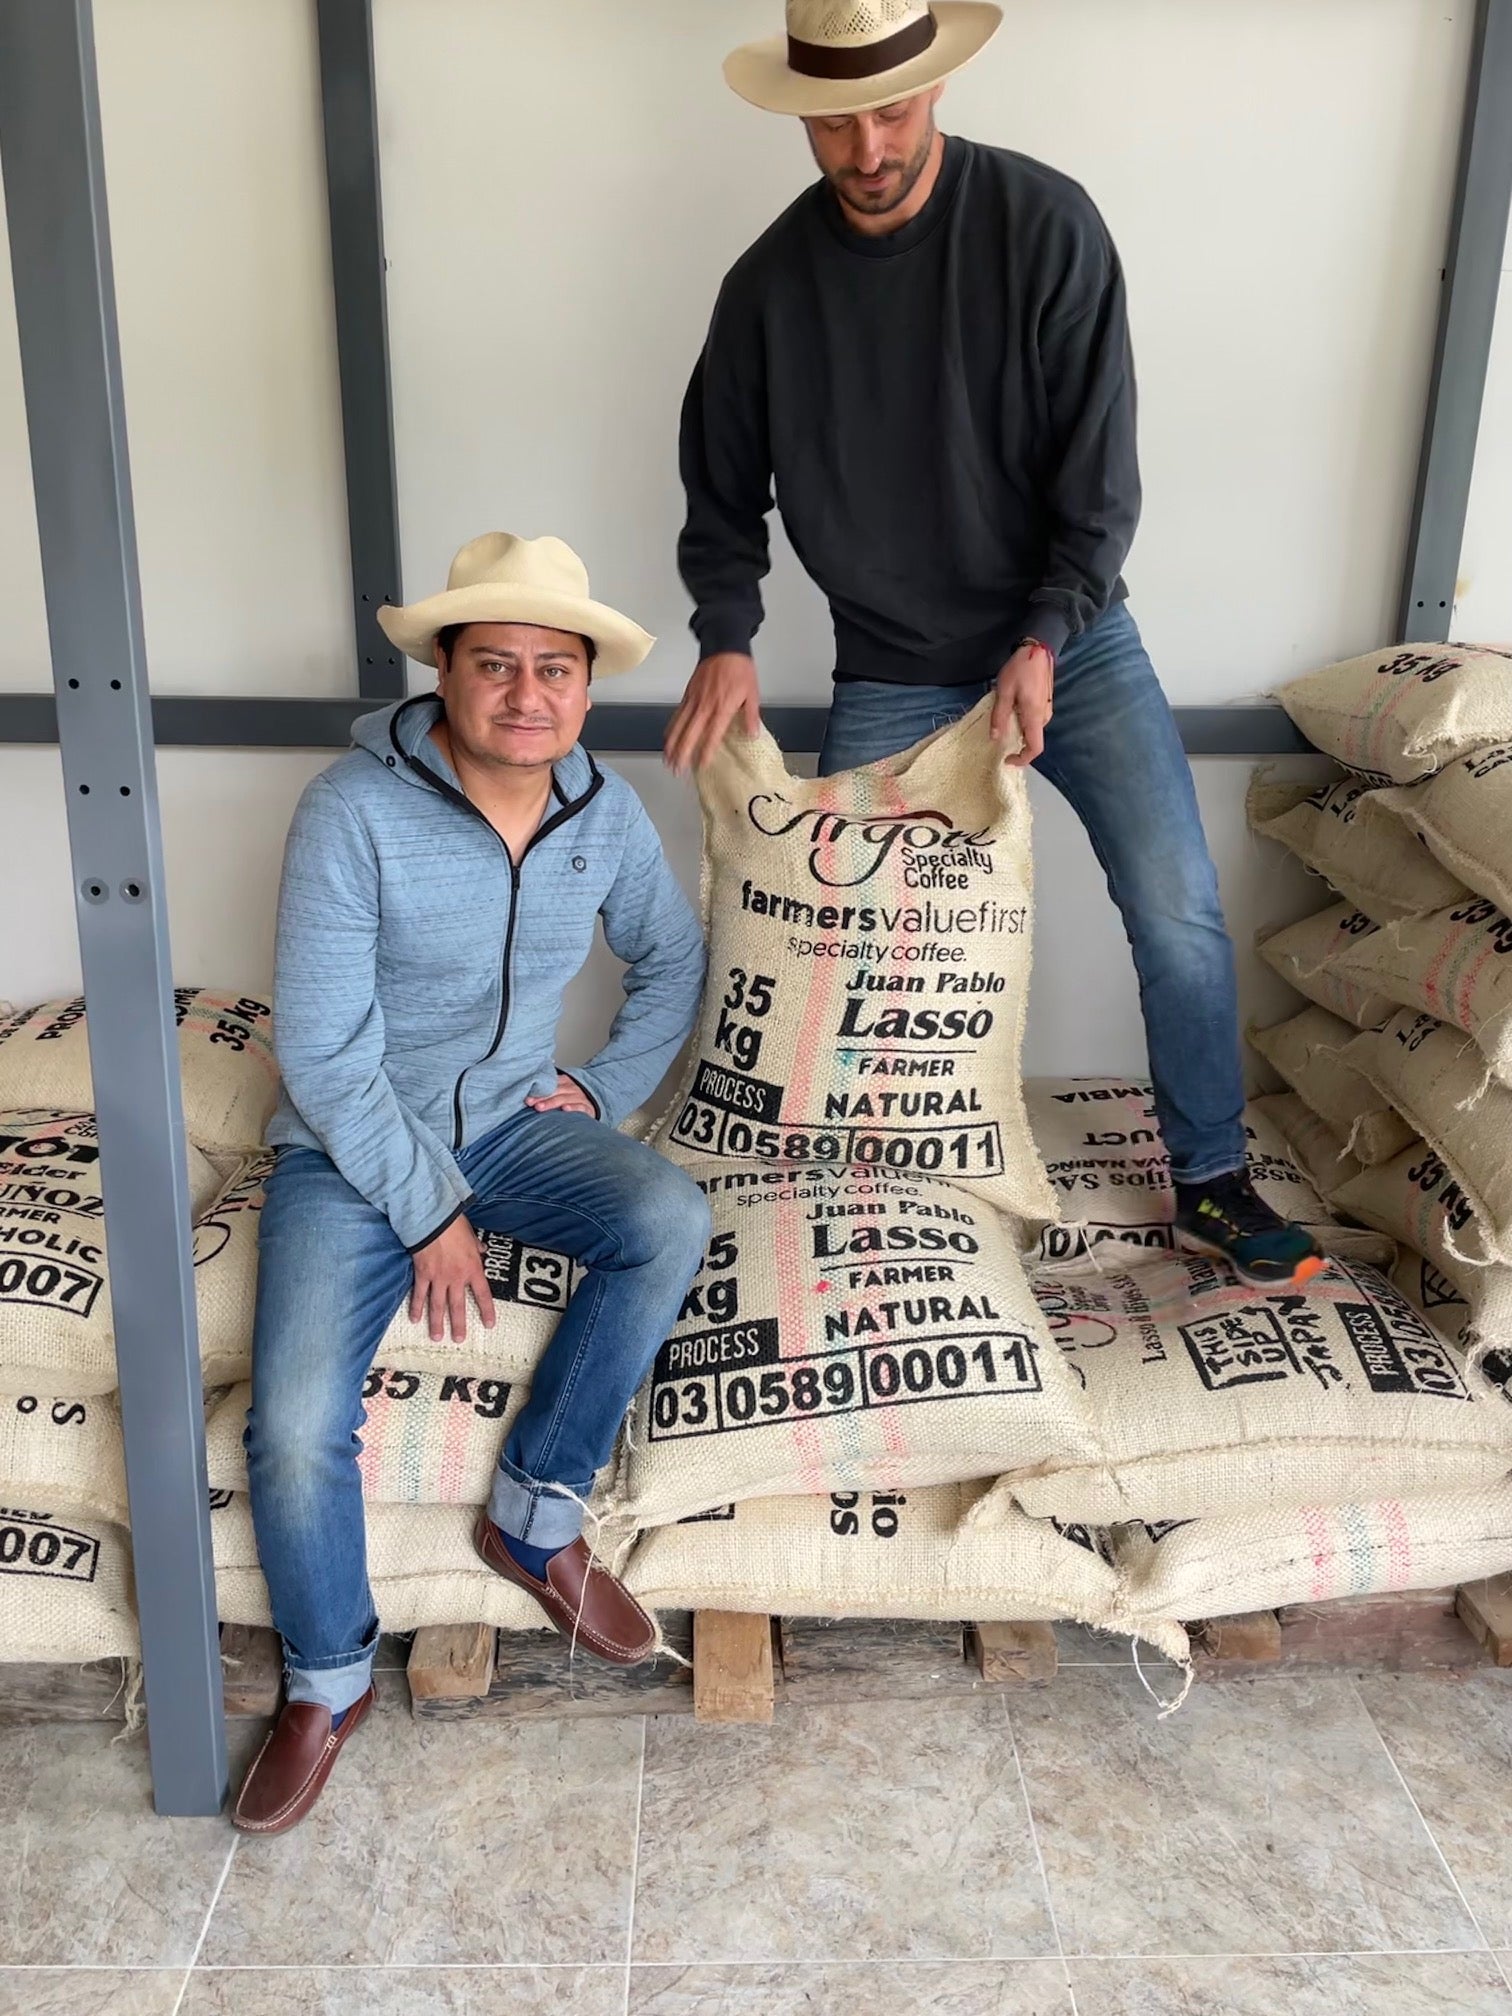  Celebrating farmersvaluefirst first ever green coffee bag together! Juan Pablo Argote, Argote Specialty Coffee on the left & André Näder, farmersvaluefirst on the right. 